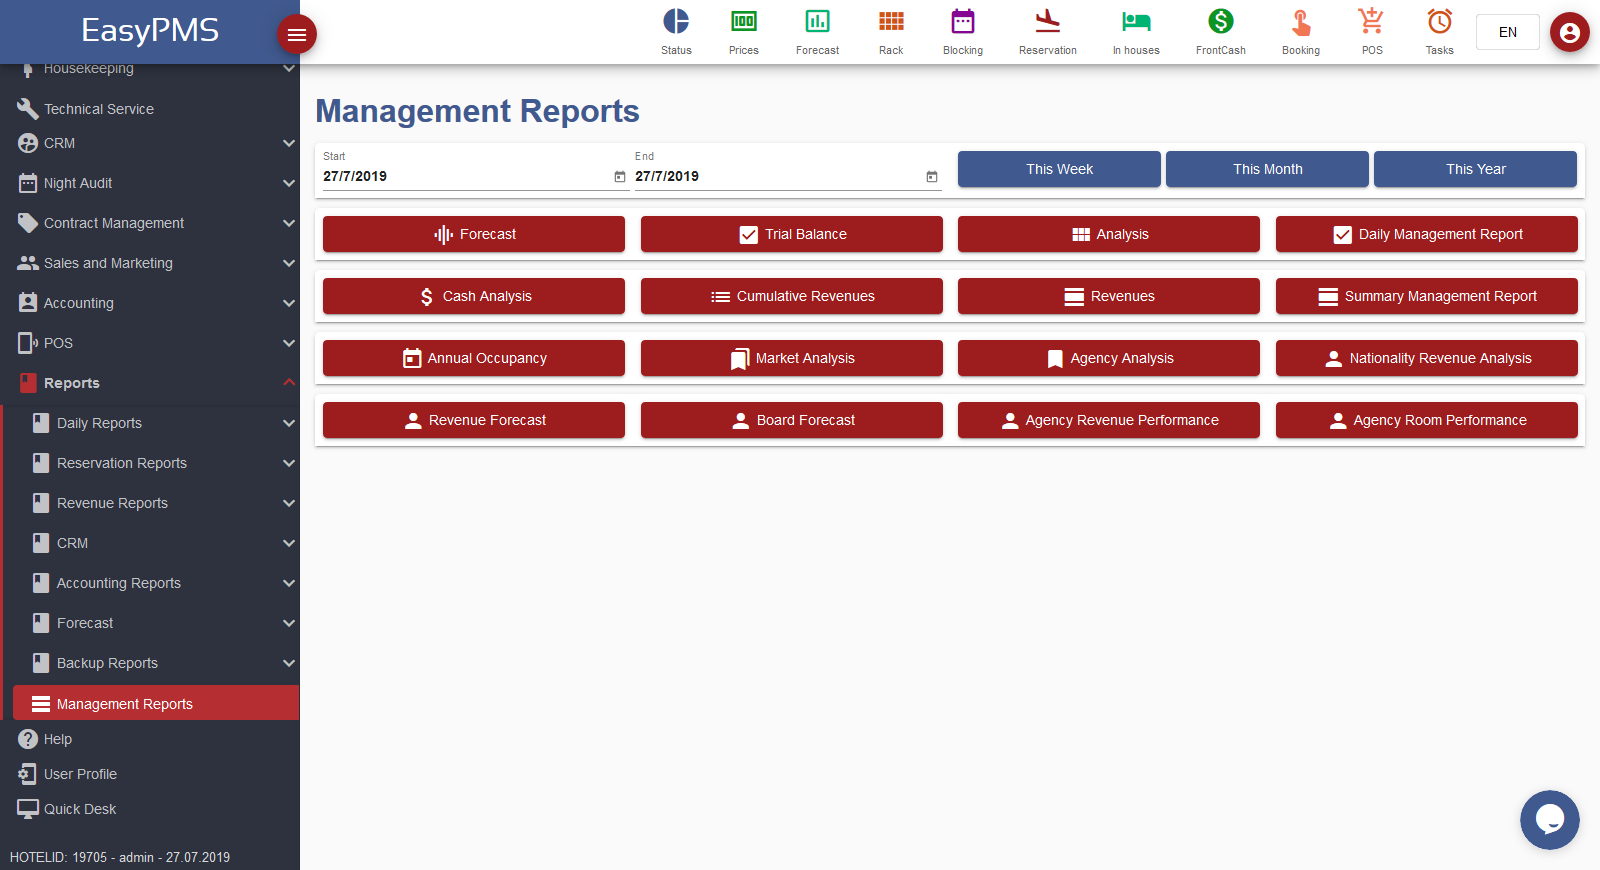 easypms Hotel software Management Reports